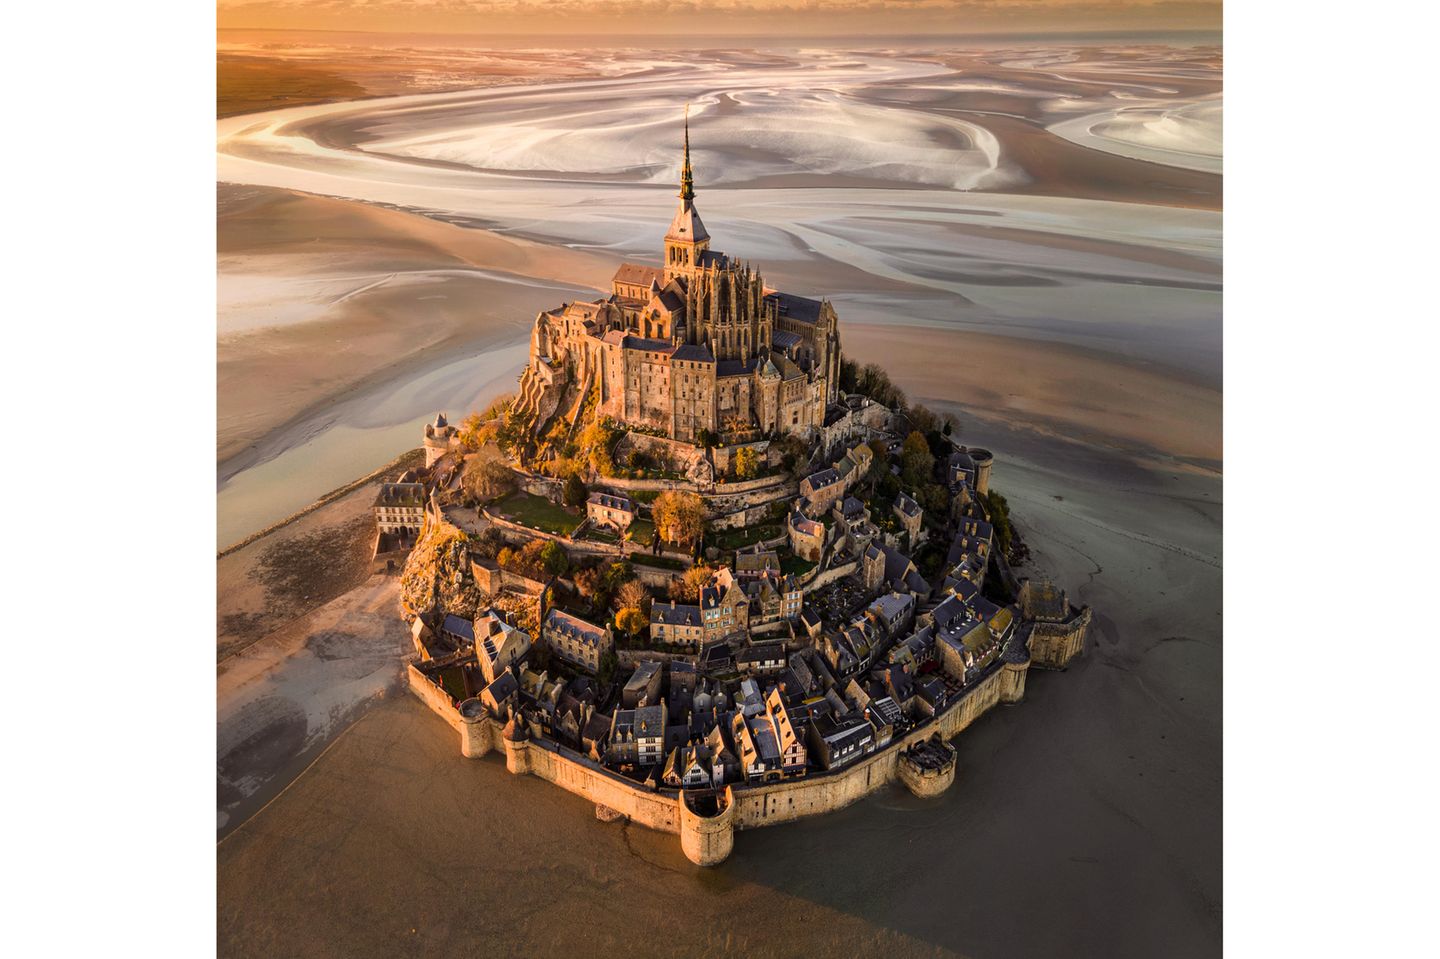 Image Name: Le Mont.Saint-Michel at Sunset  Photographer Name: Cigdem Ayyildiz  Year: 2022  Image Description: <p>For me, this piece of art on the shores of Normandy is a candidate for Eighth Wonder of the World; providing a legendary view and atmosphere especially at sunset and when the tide is low.</p>  Copyright: © Cigdem Ayyildiz, Turkey, Winner, National Awards, Landscape, 2022 Sony World Photography Awards